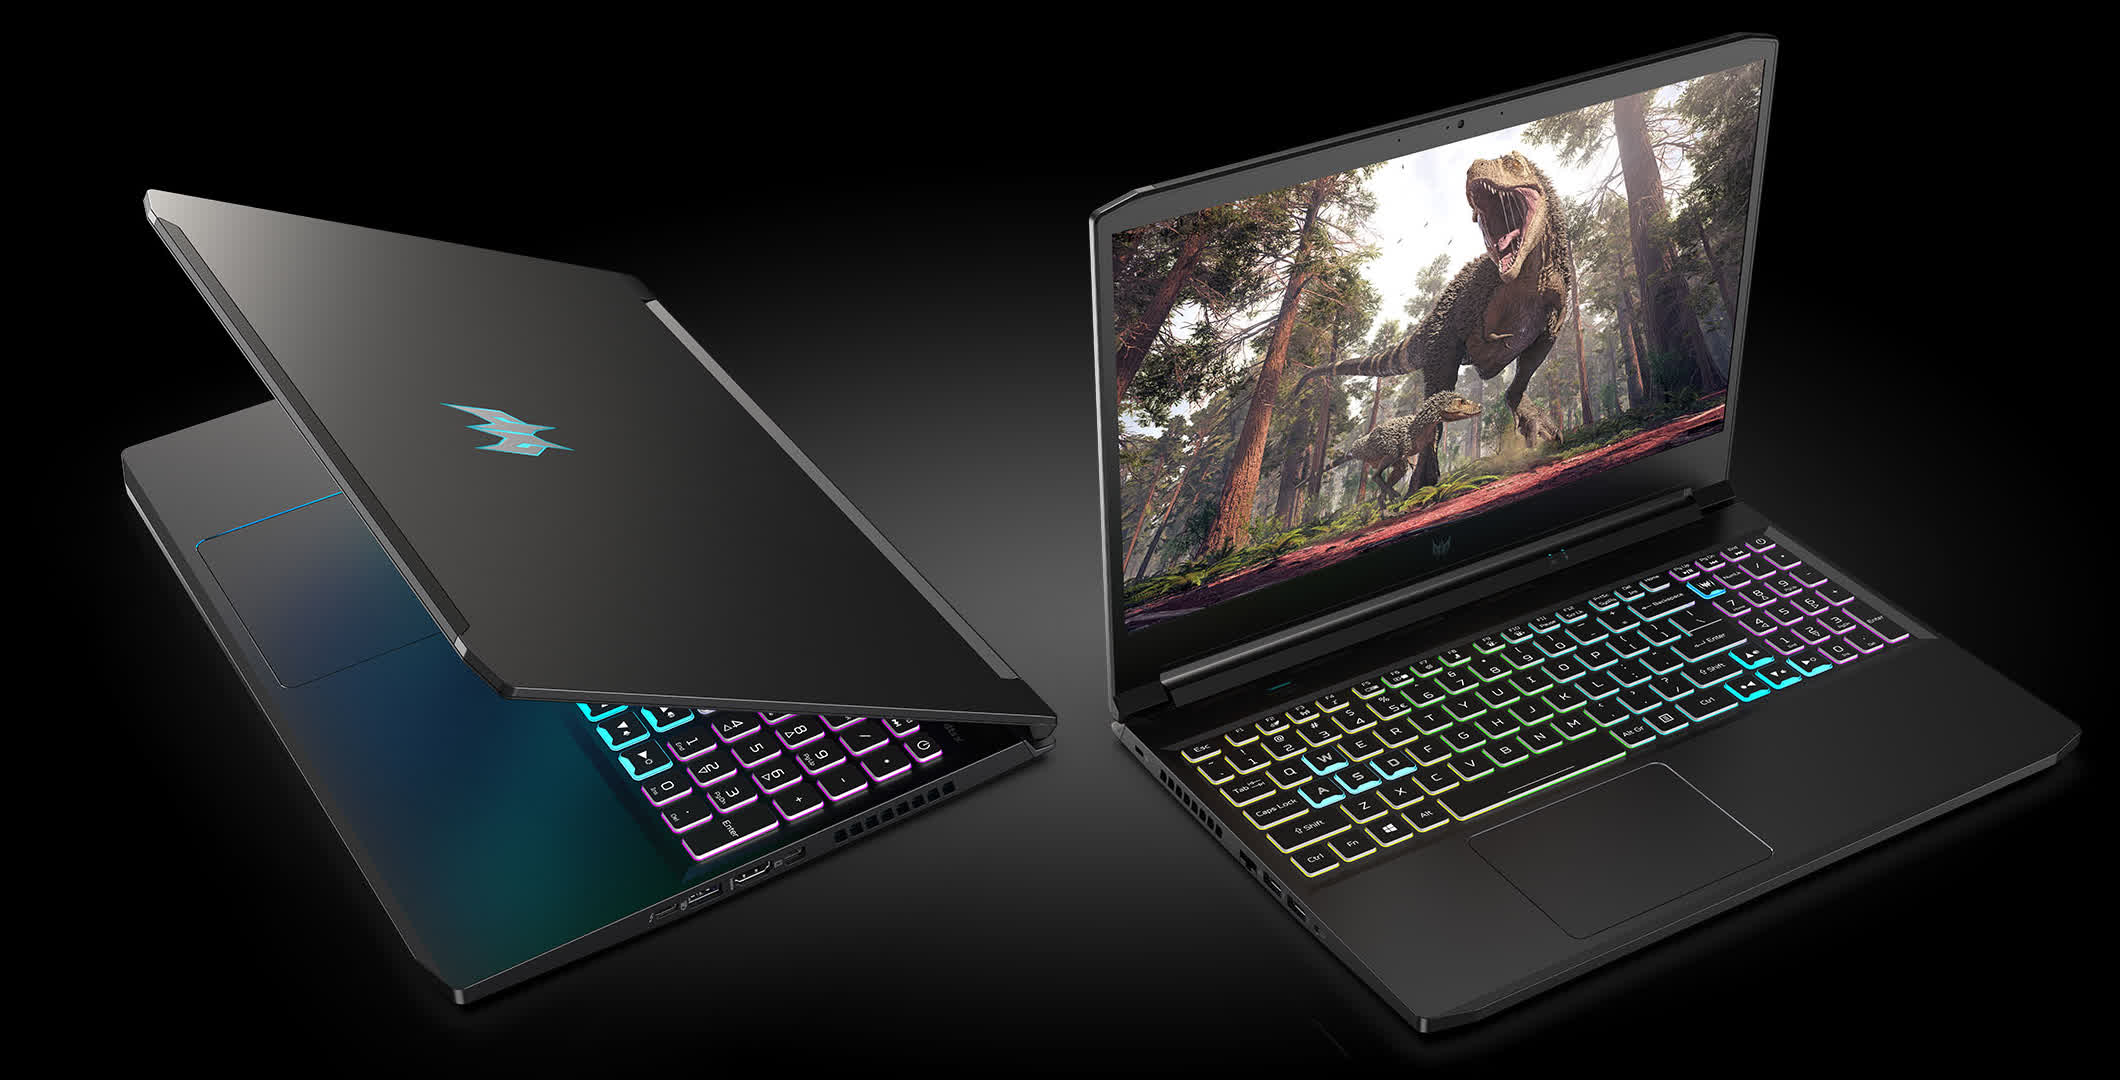 Acer is increasing the TGP of the RTX 30 series GPUs in its latest gaming laptops